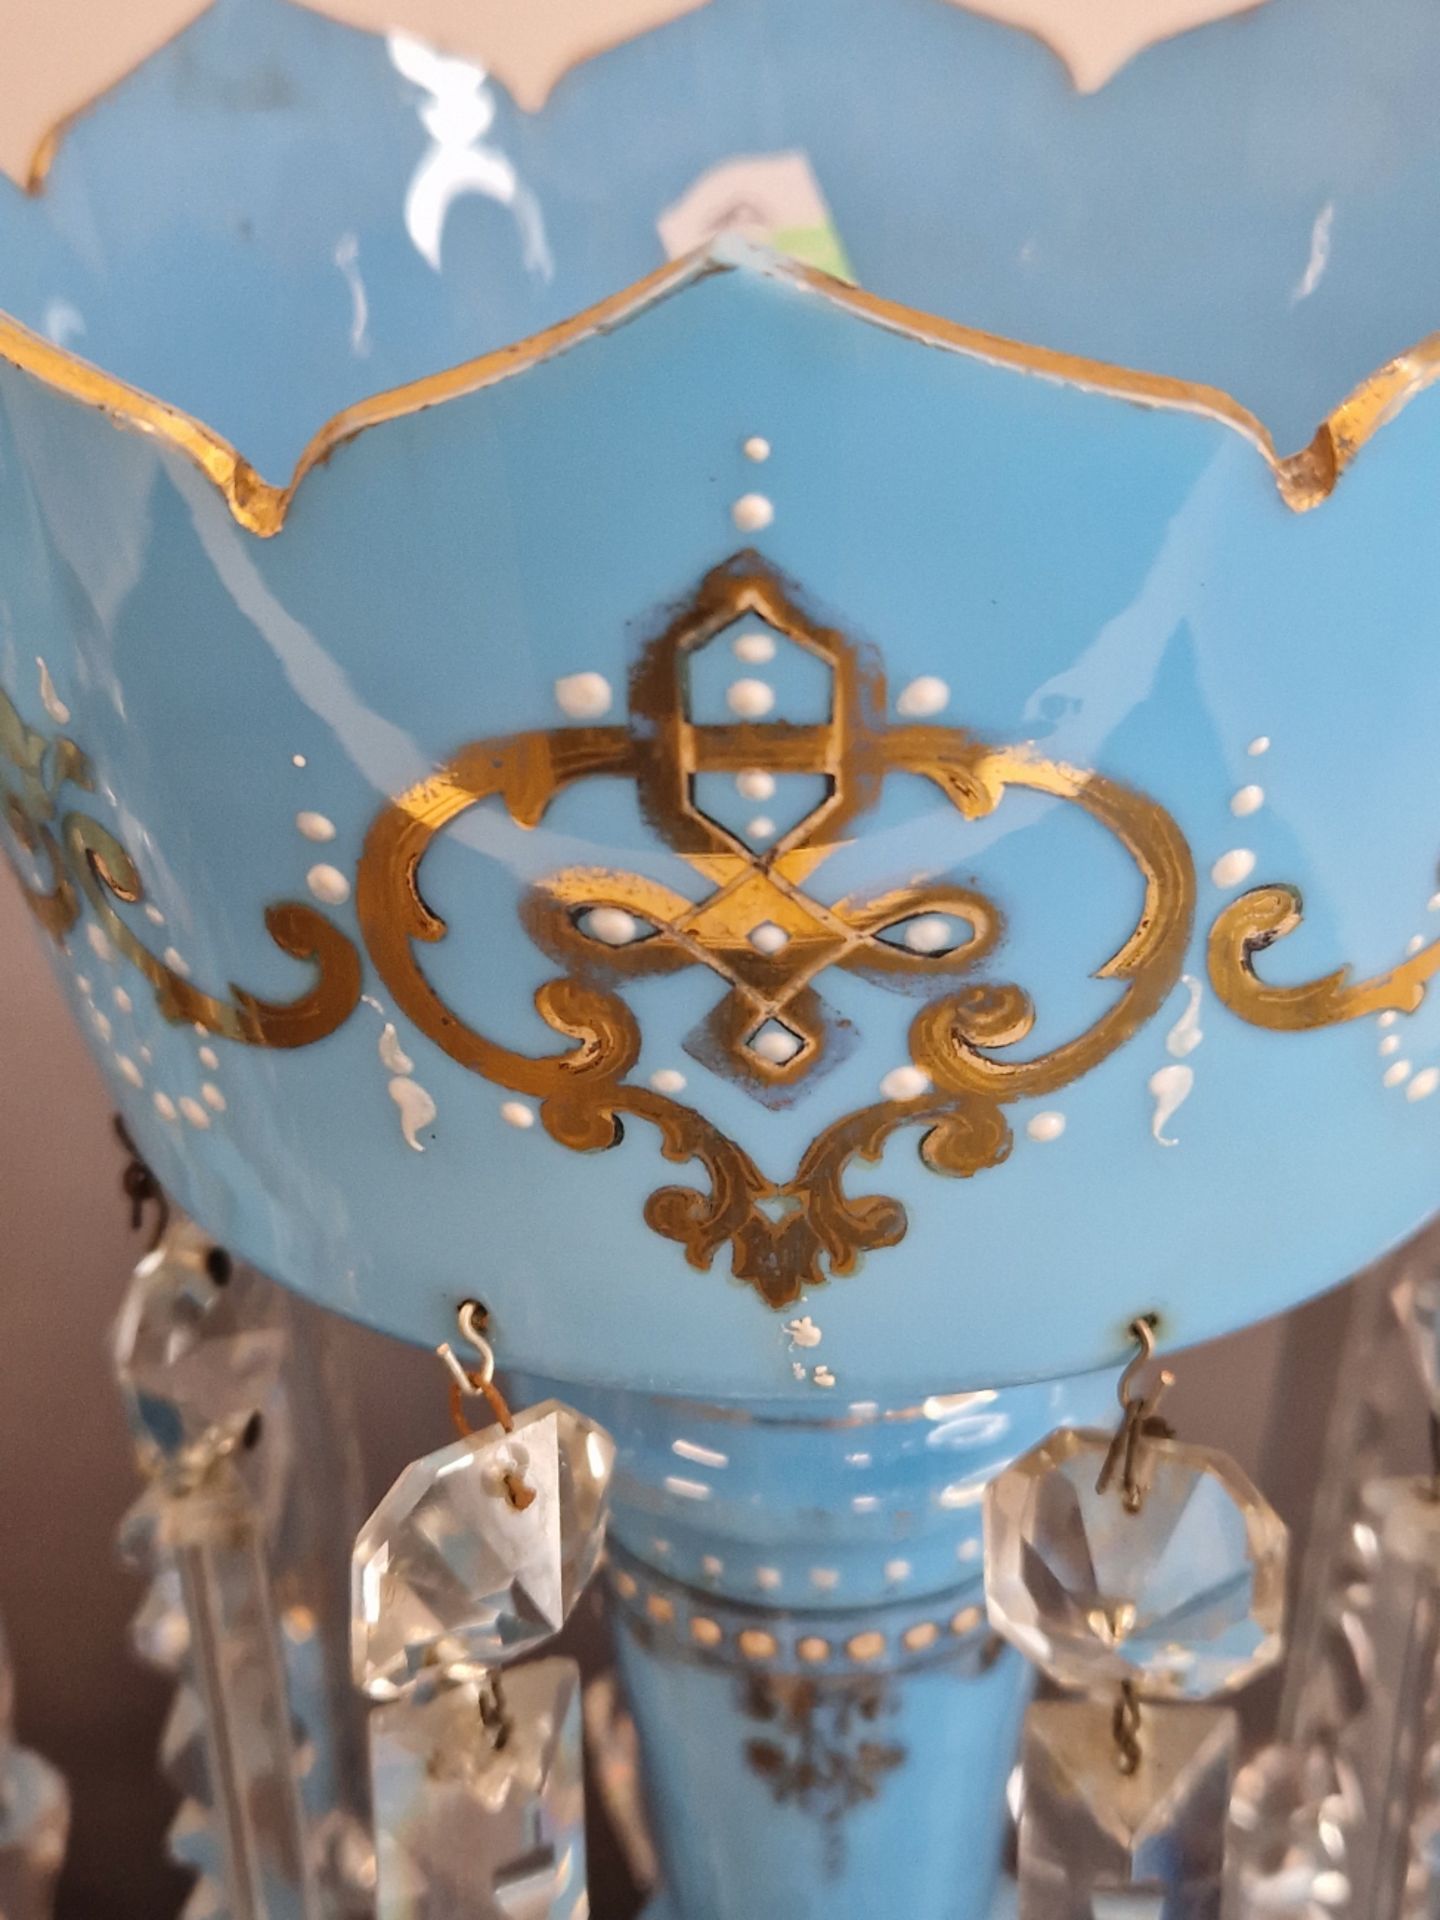 A PAIR OF LATE 19th C. BOHEMIAN SKY BLUE GLASS LUSTRES, THE CROWN TOPS GILT WITH SCROLL BANDS ABOVE - Image 5 of 5